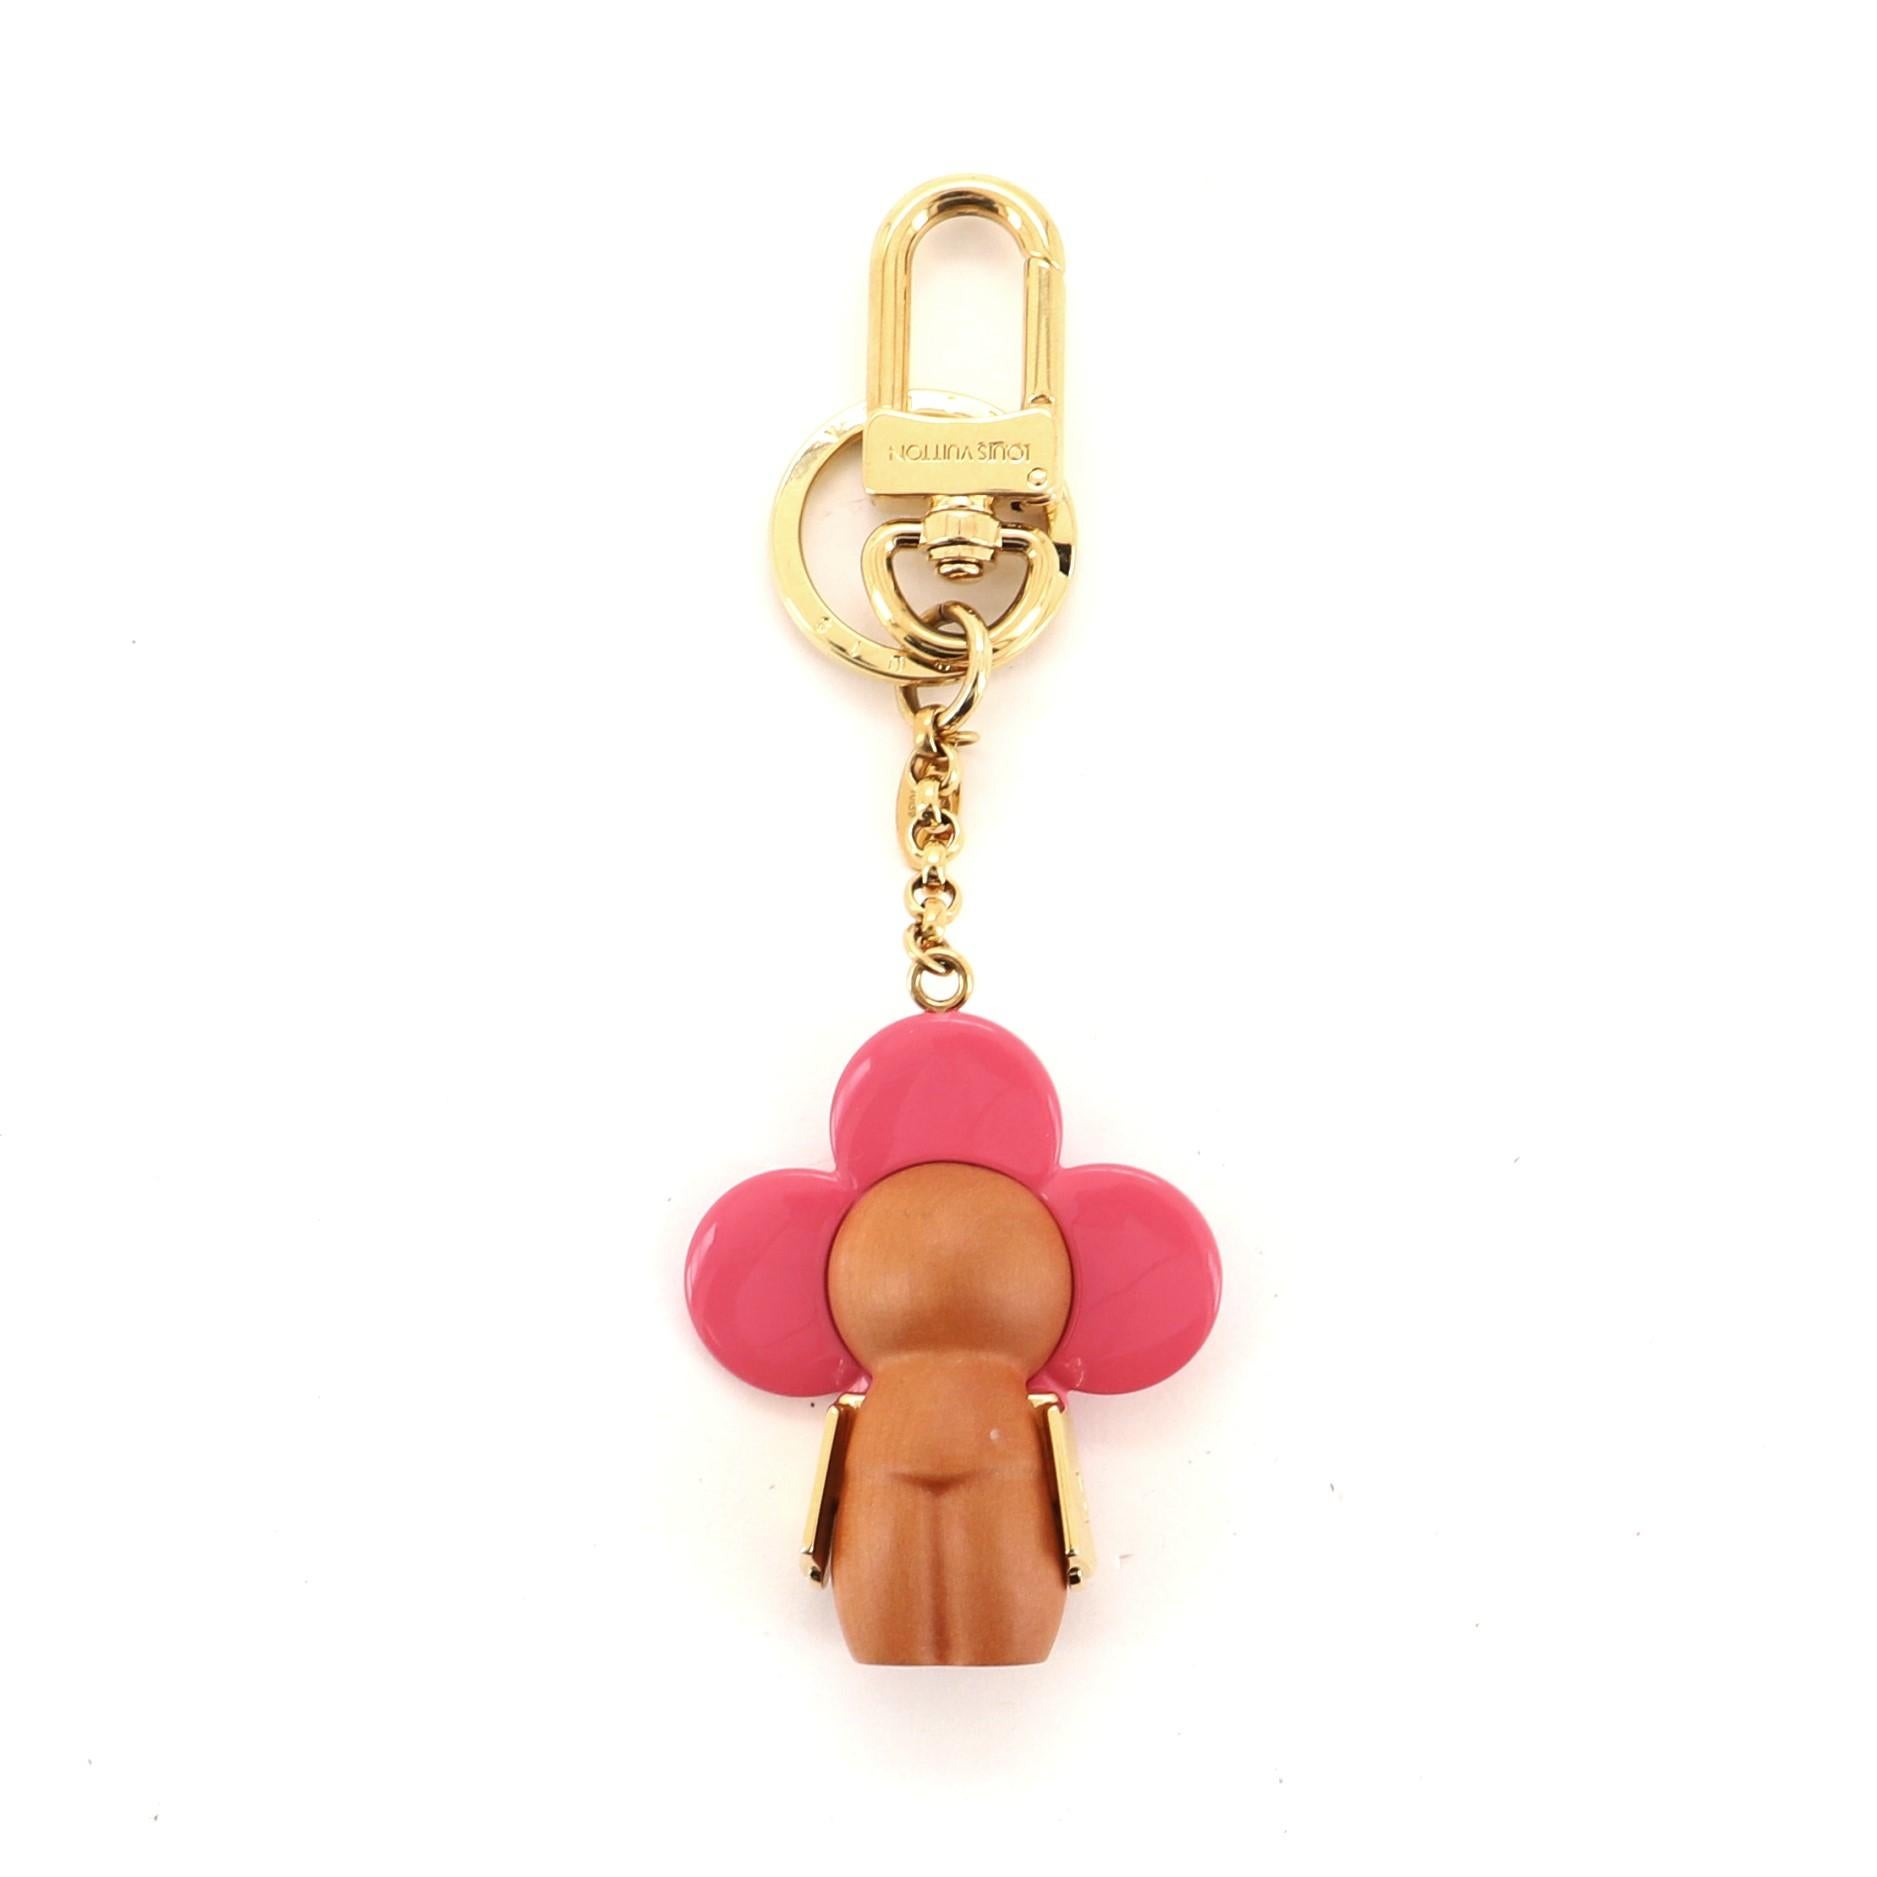 Louis Vuitton Vivienne Doudoune Bag Charm and Key Holder Wood and Resin
Pink Resin Gold

Condition Details: Moderate scratches and wear throughout.

50466MSC

Height 5.5